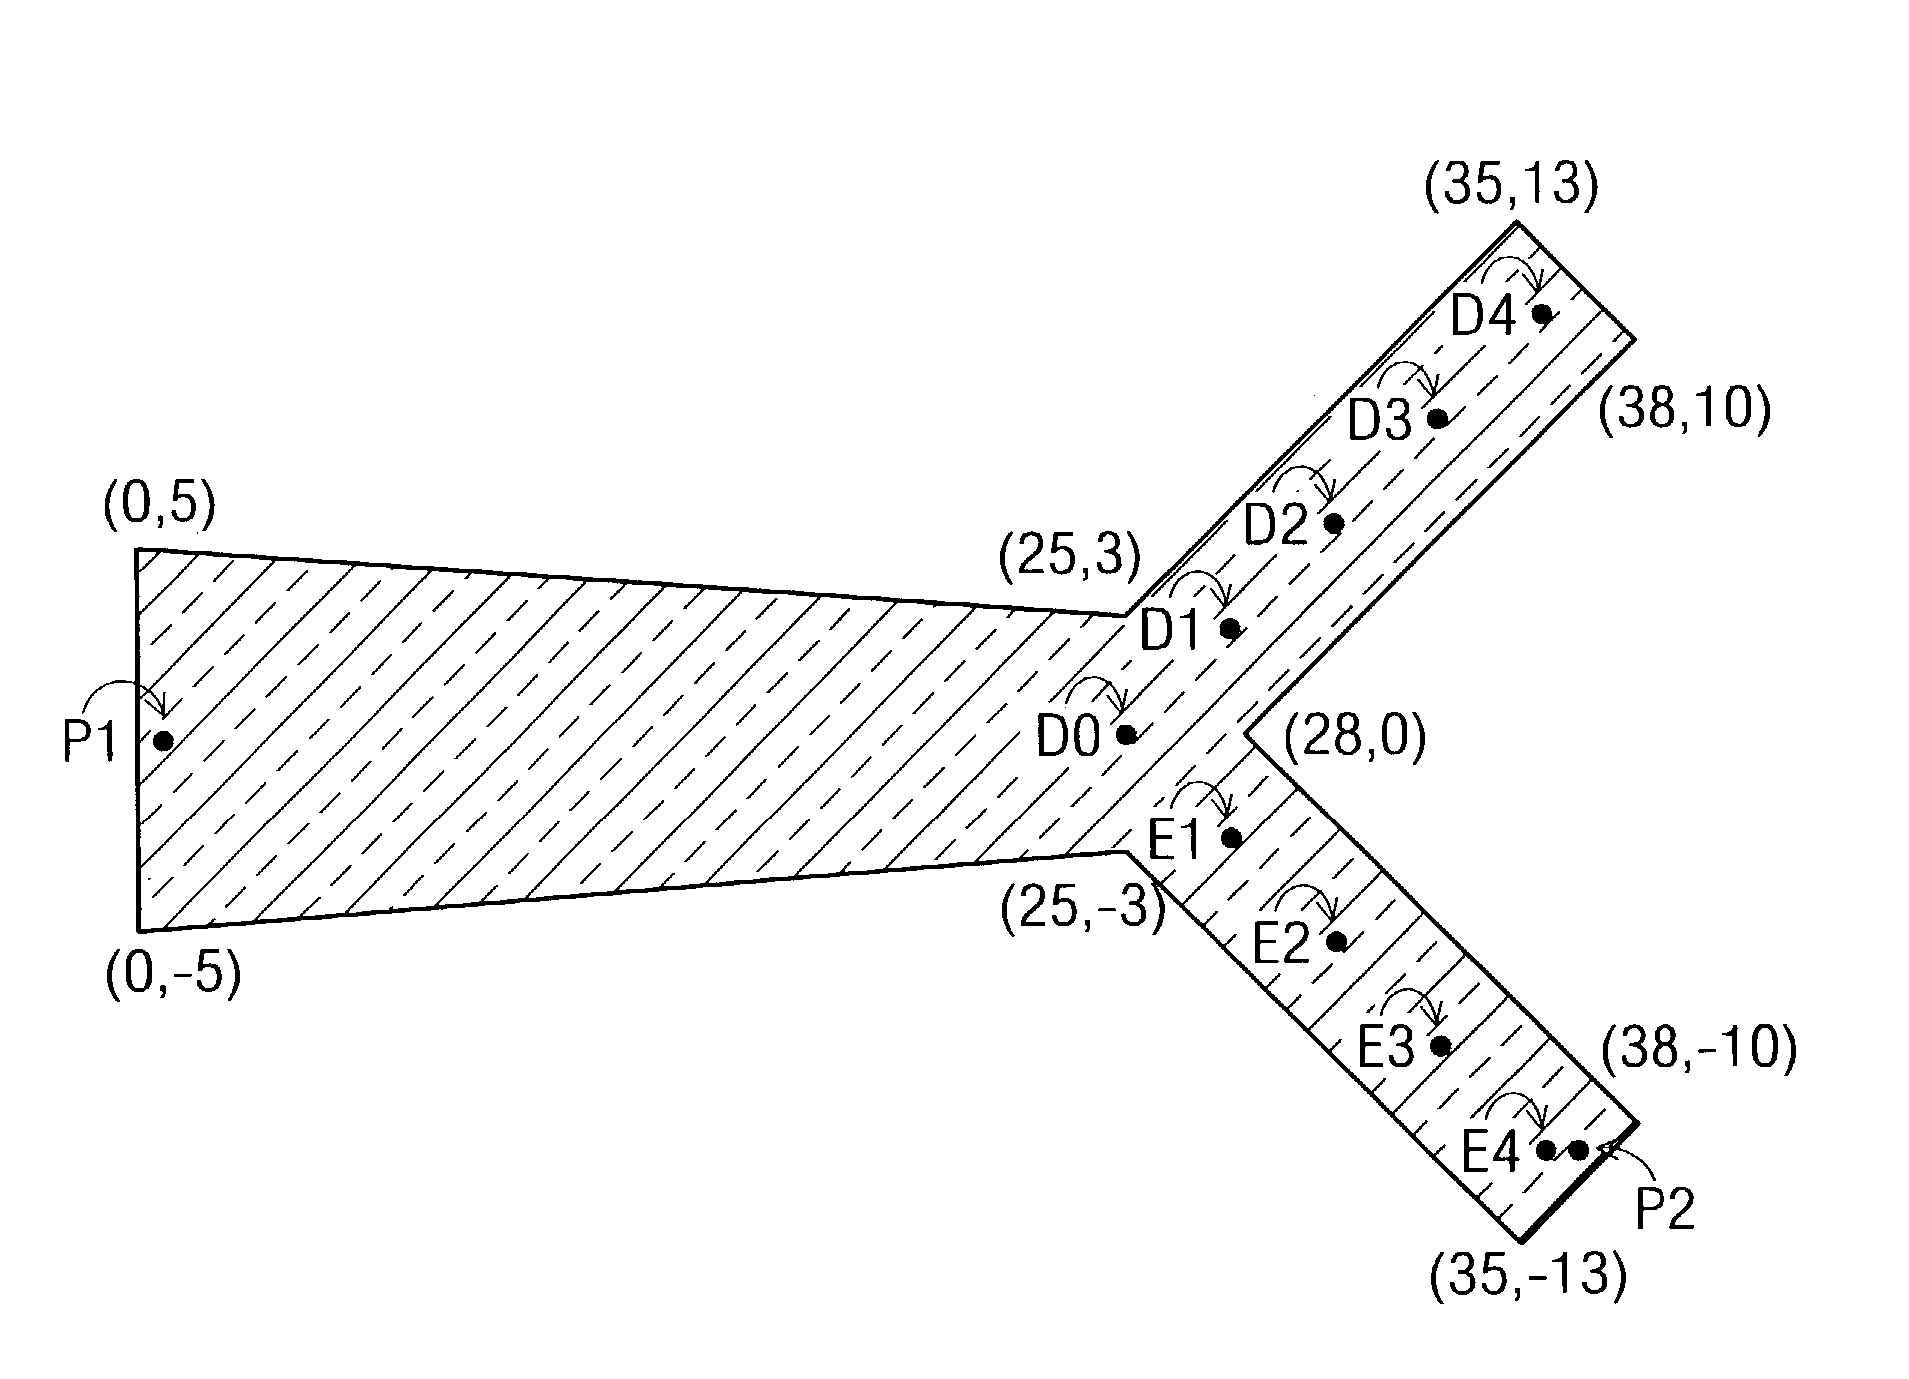 Method of reducing switching noise in a power distribution system by external coupled resistive terminators